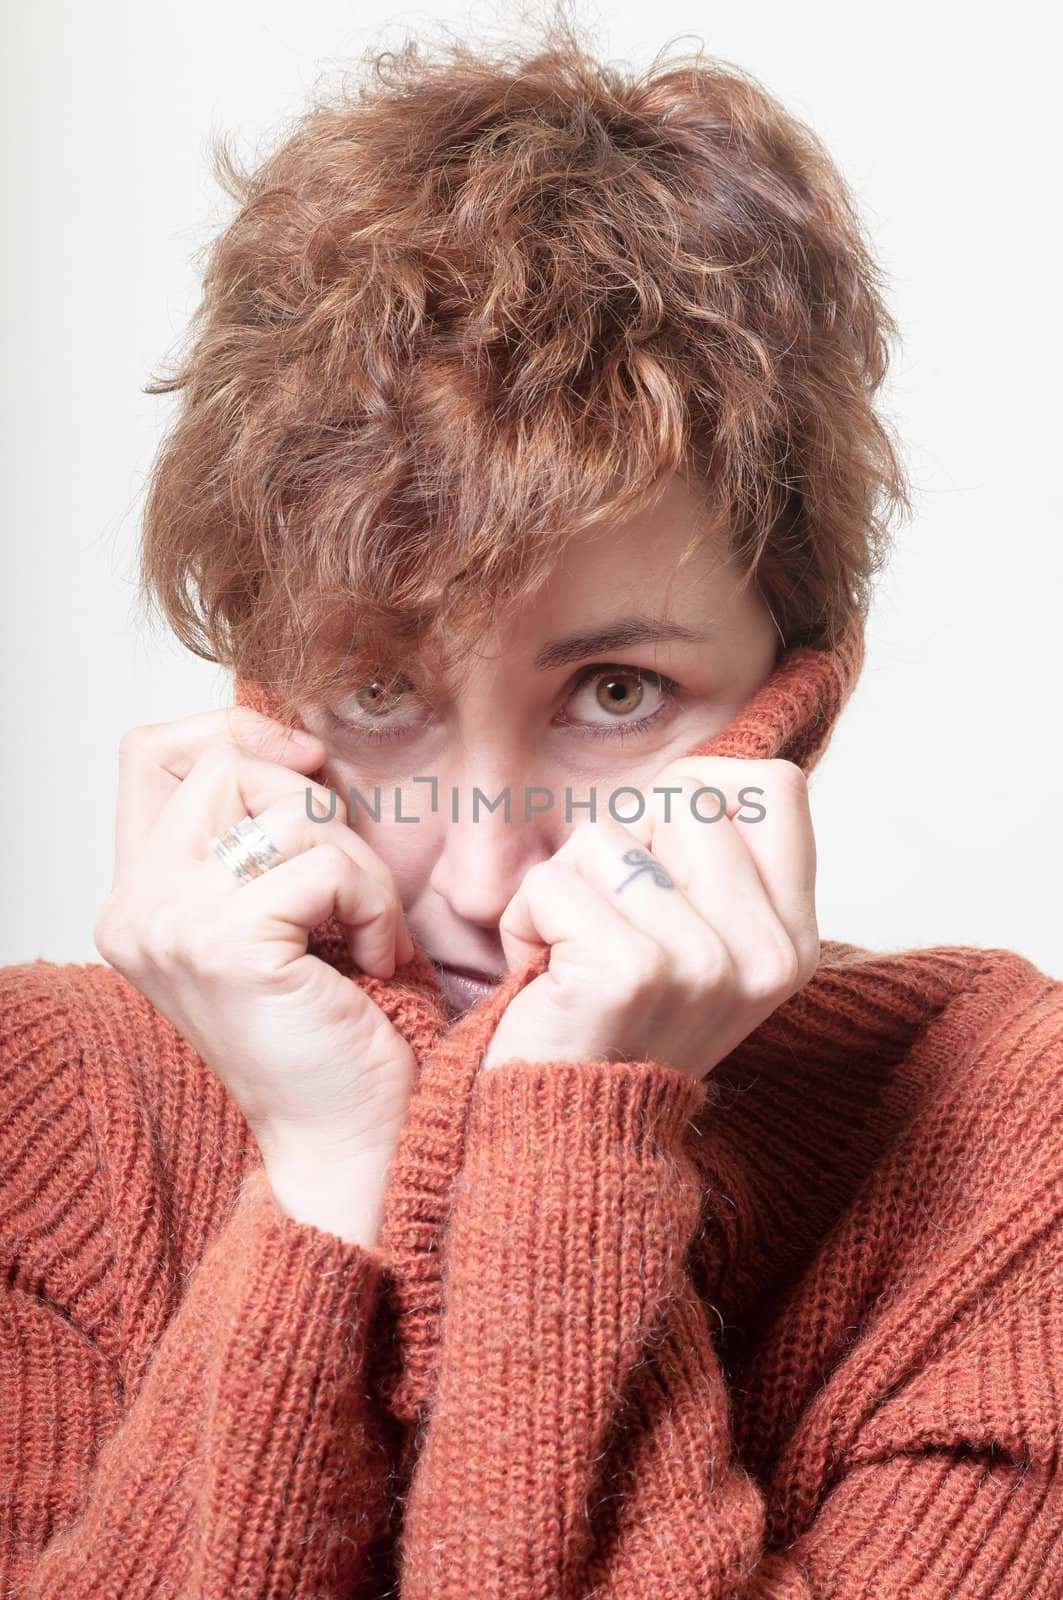 short hair girl cold with orange sweater on white background